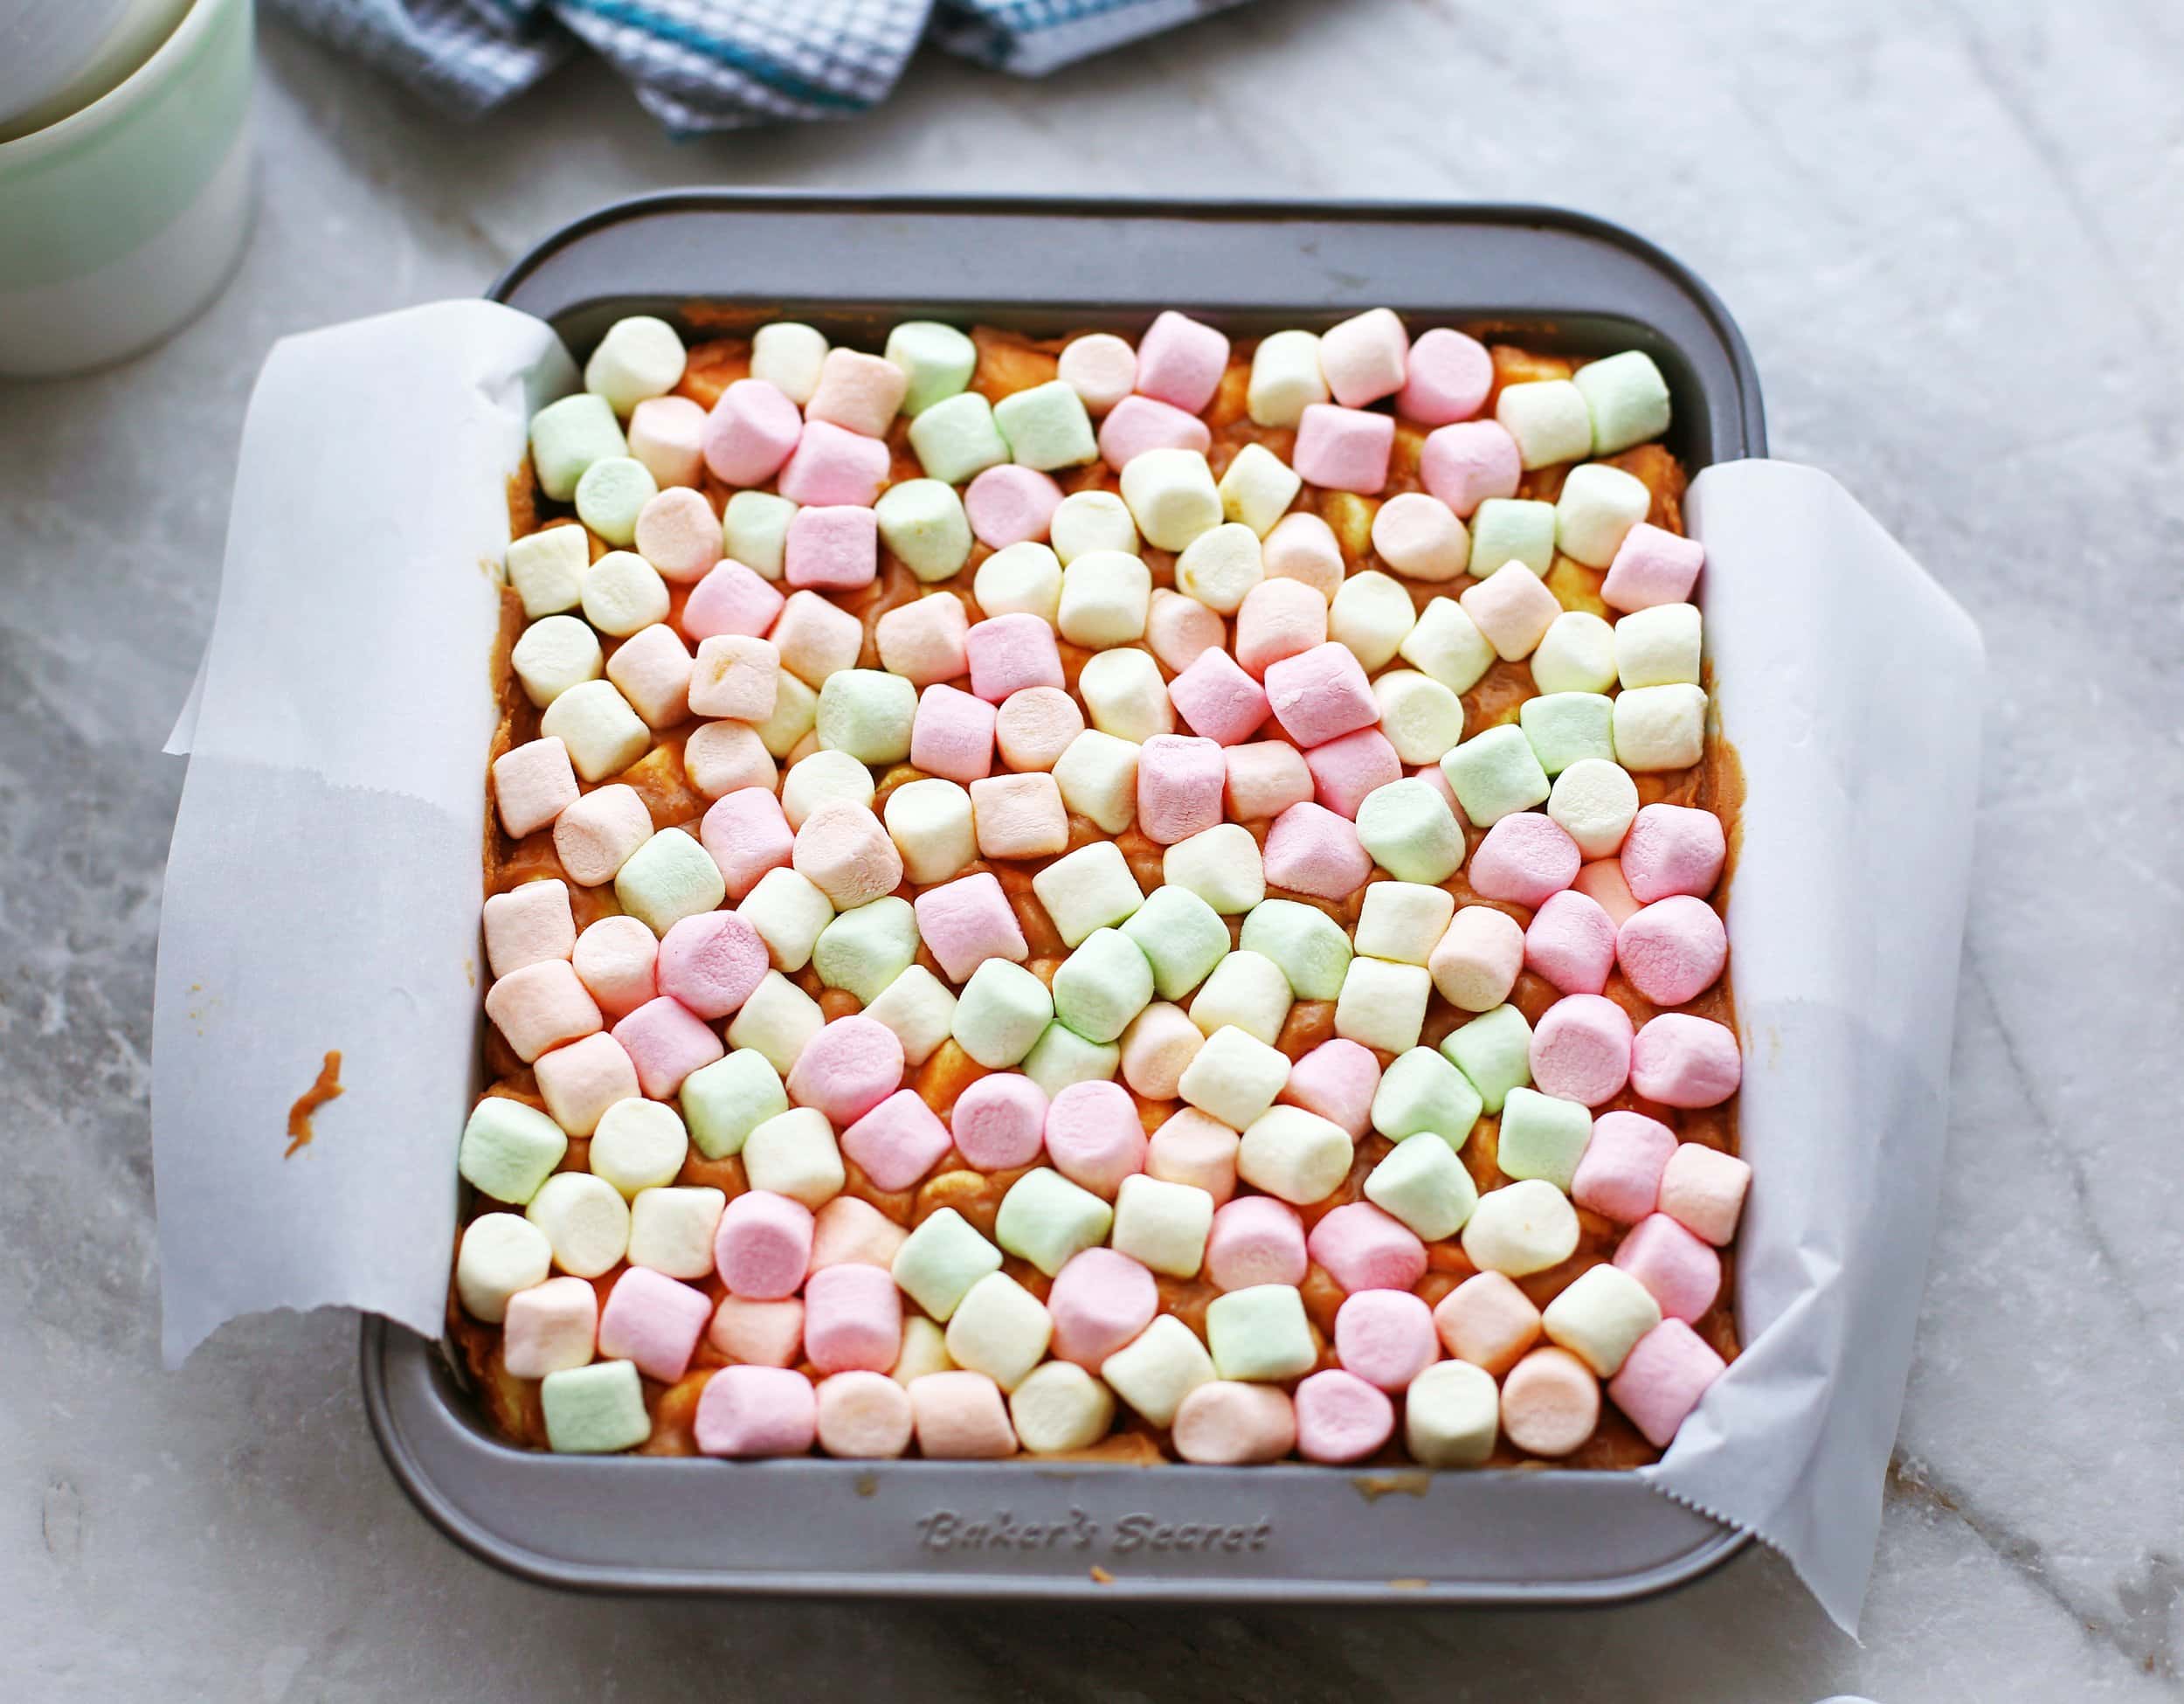 Combined confetti bar ingredients in a square parchment paper lined baking dish.